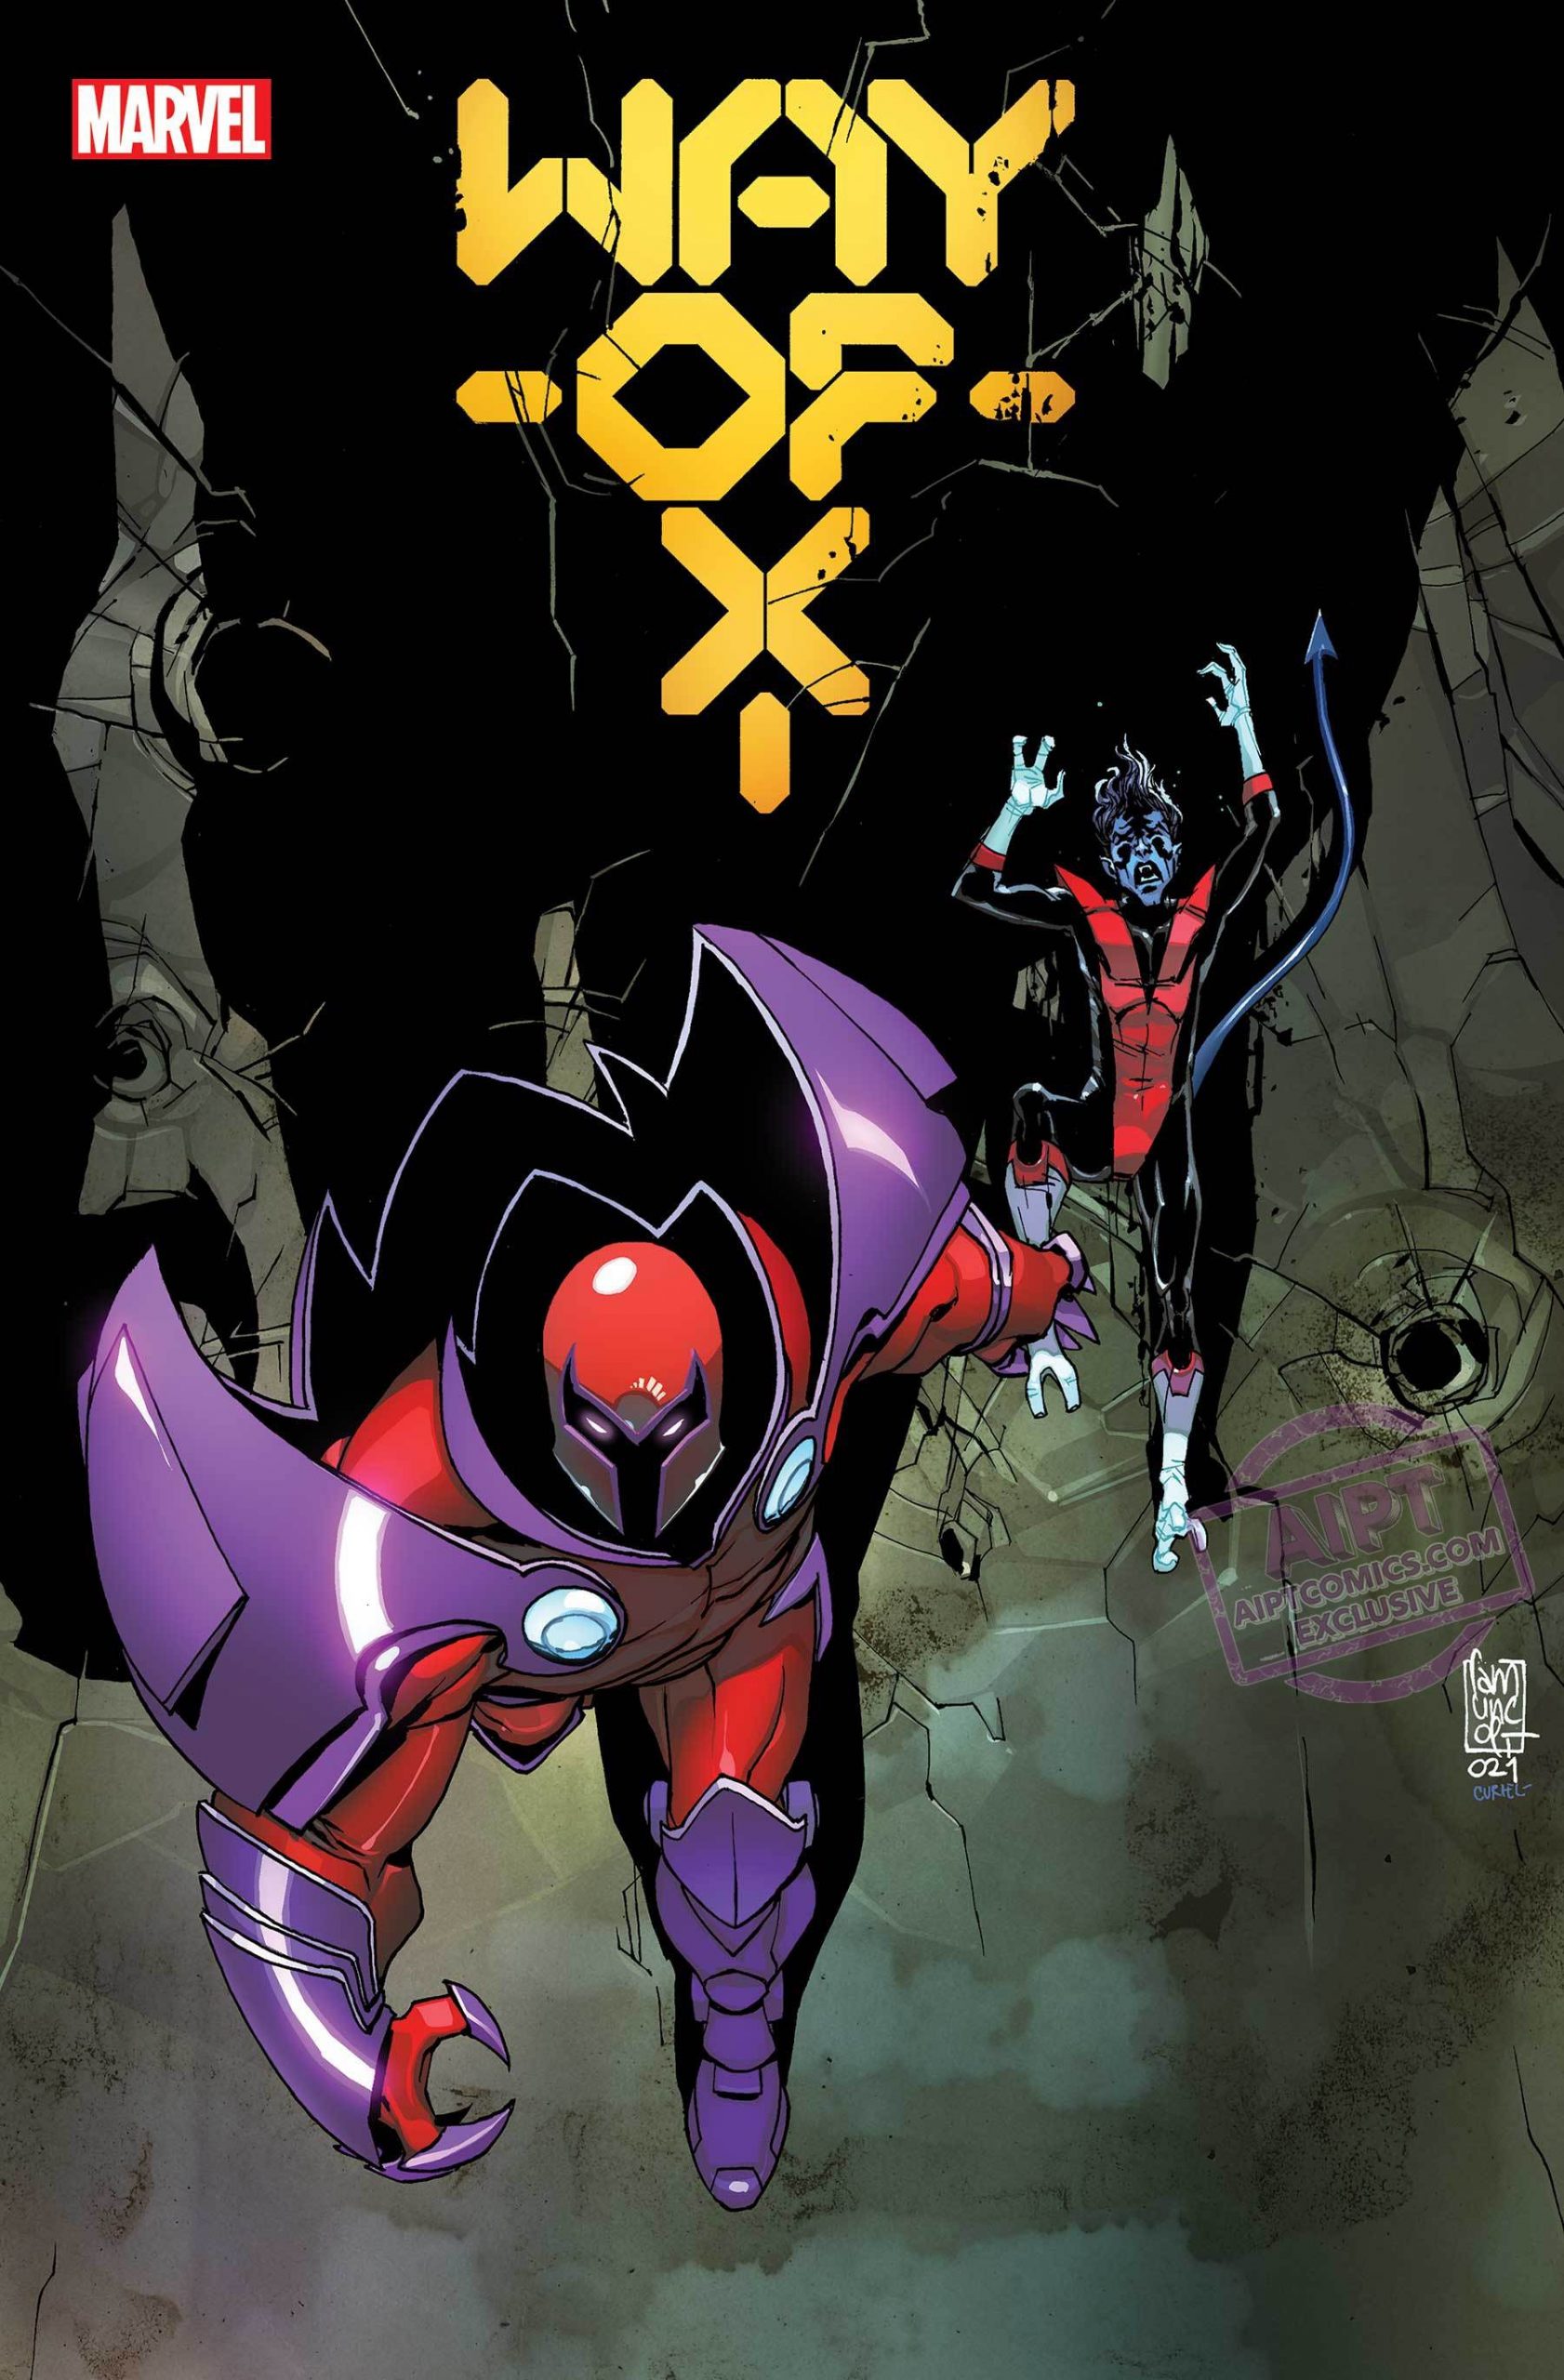 EXCLUSIVE Marvel First Look: Way of X #5